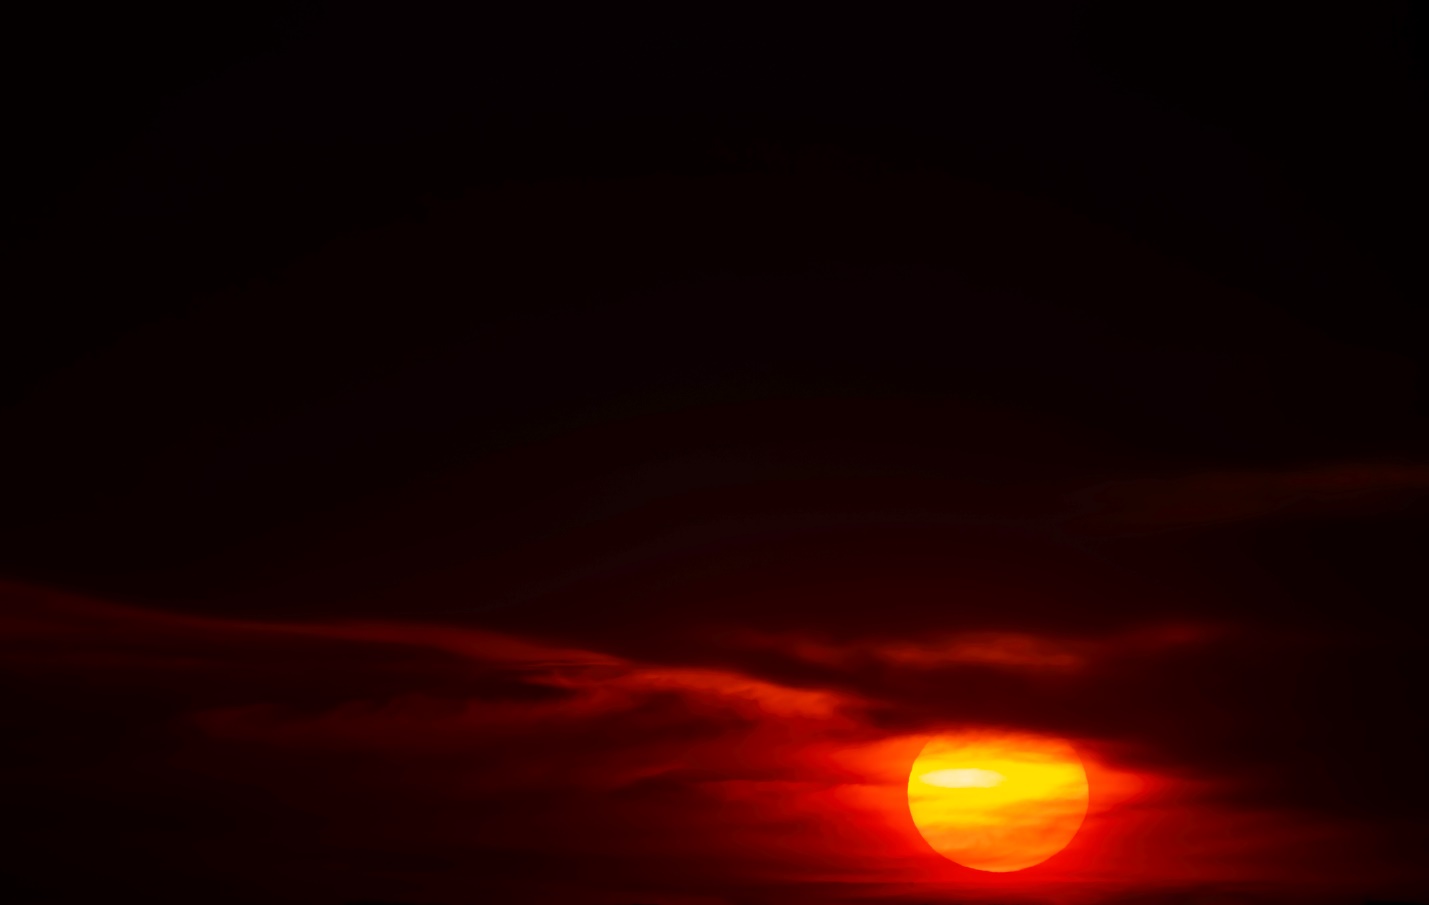 A picture containing sunset, night sky

Description automatically generated